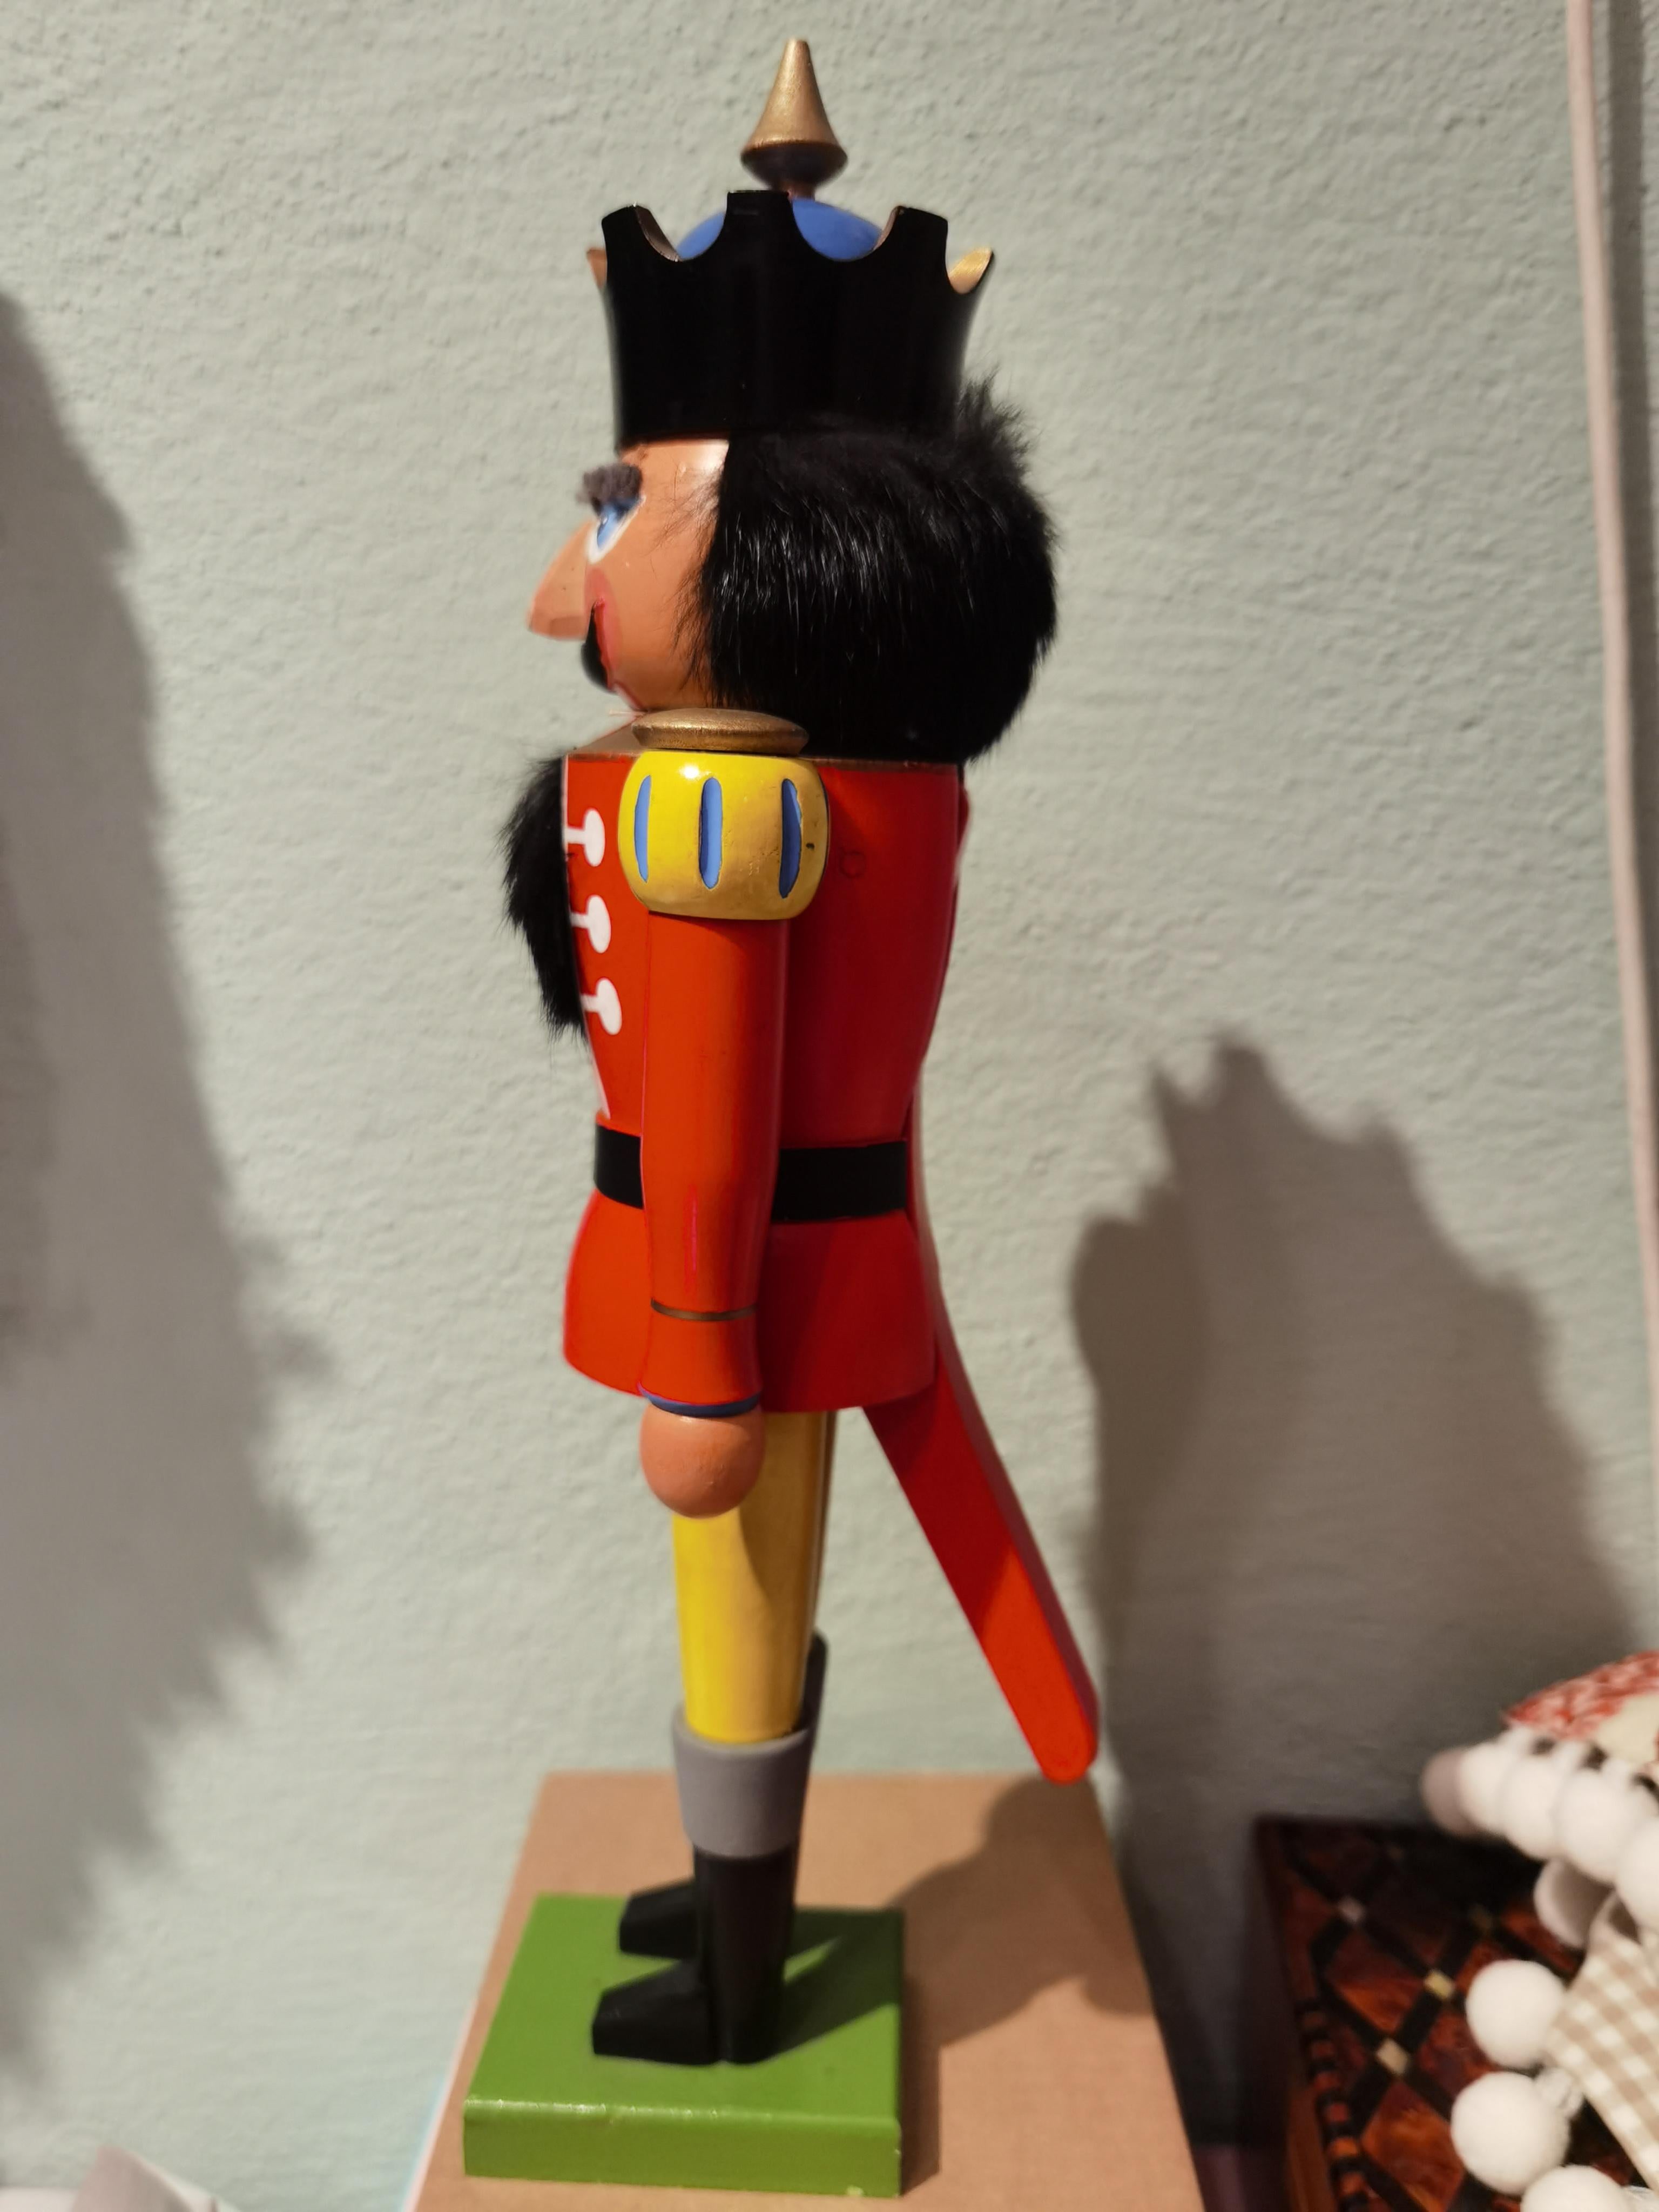 Large wooden nutcracker figure from the Erzgebirge. The region Erzgebirge formerly Eastern Germany is famous for this special kind of nutcrackers, where intricate carving has been their home. Completely hand-painted in red and yellow colors and